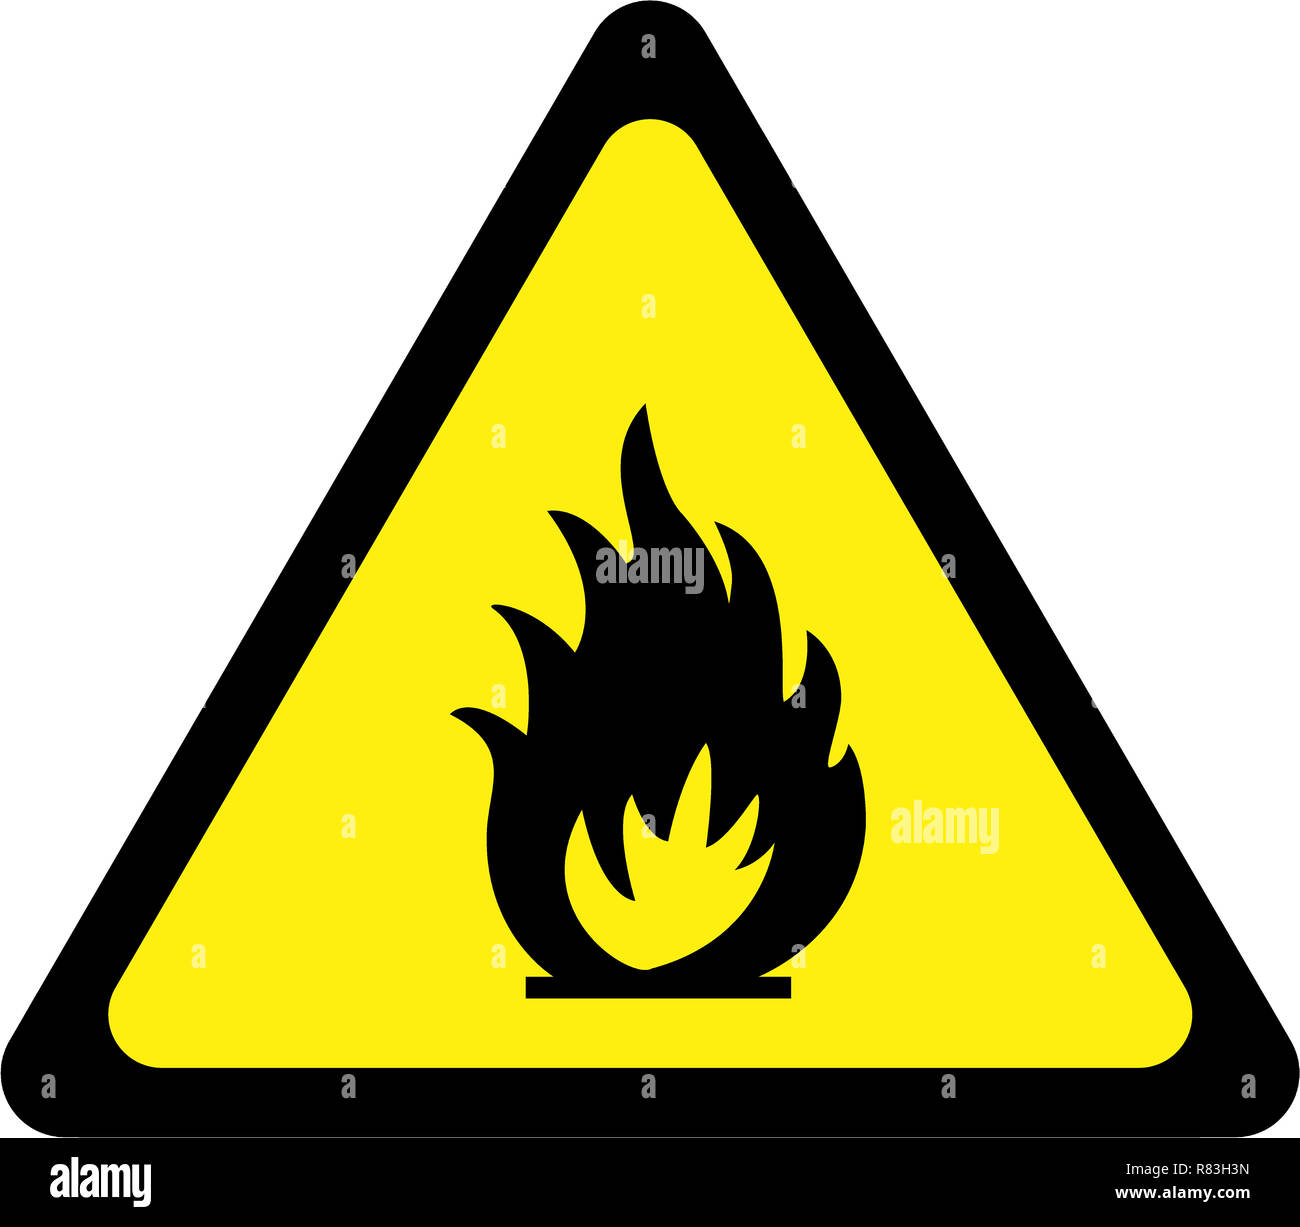 Warning sign with fire symbol Stock Photo